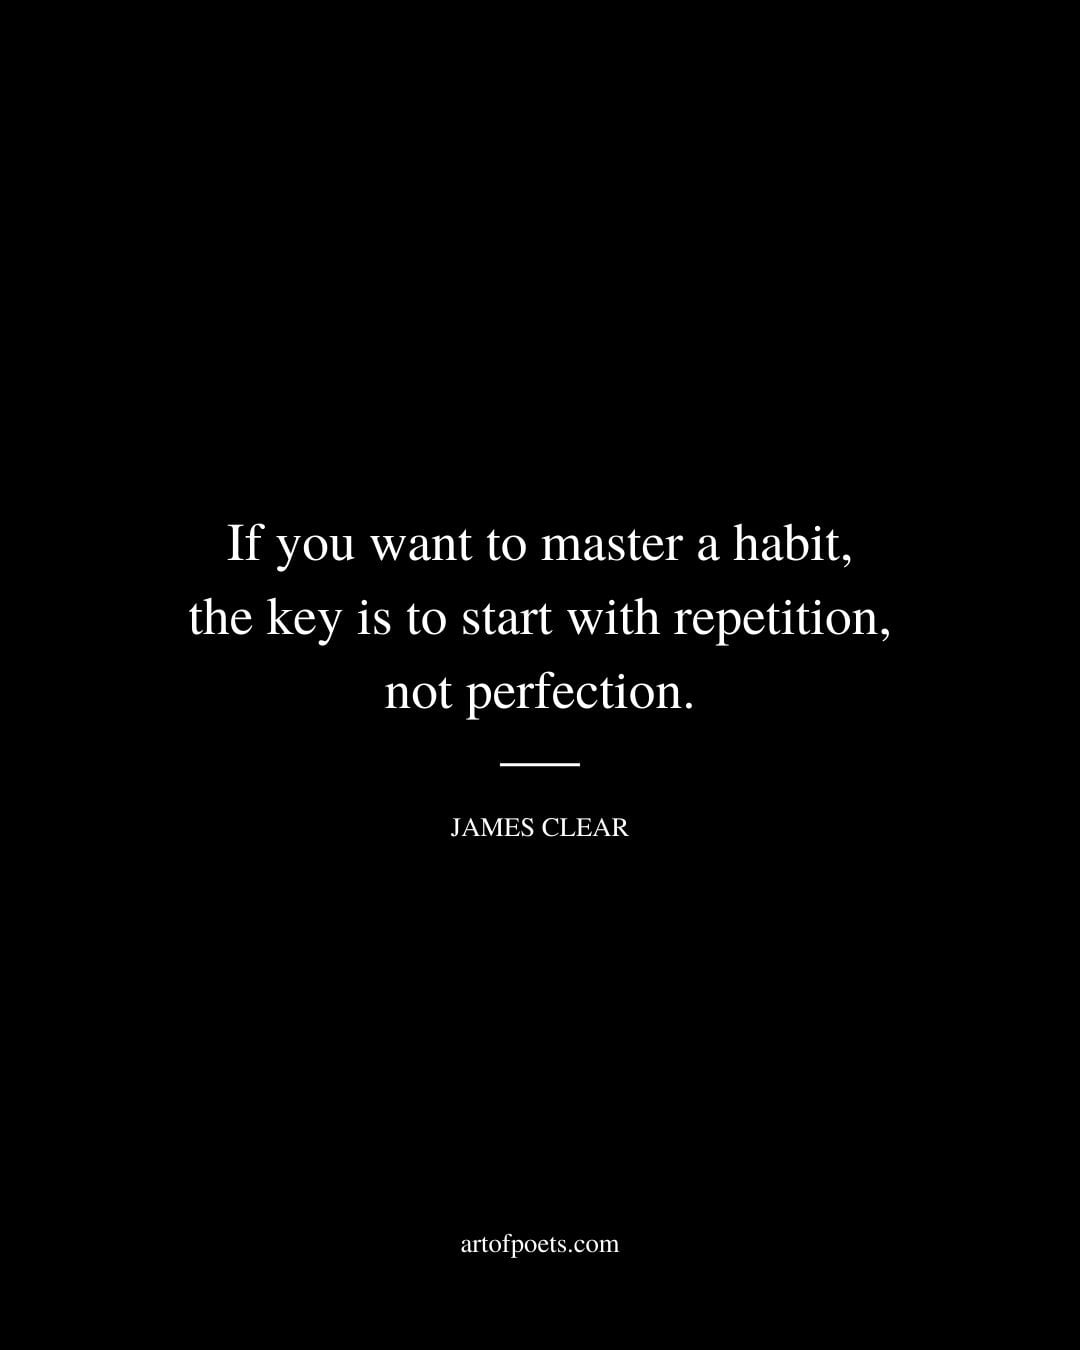 If you want to master a habit the key is to start with repetition not perfection